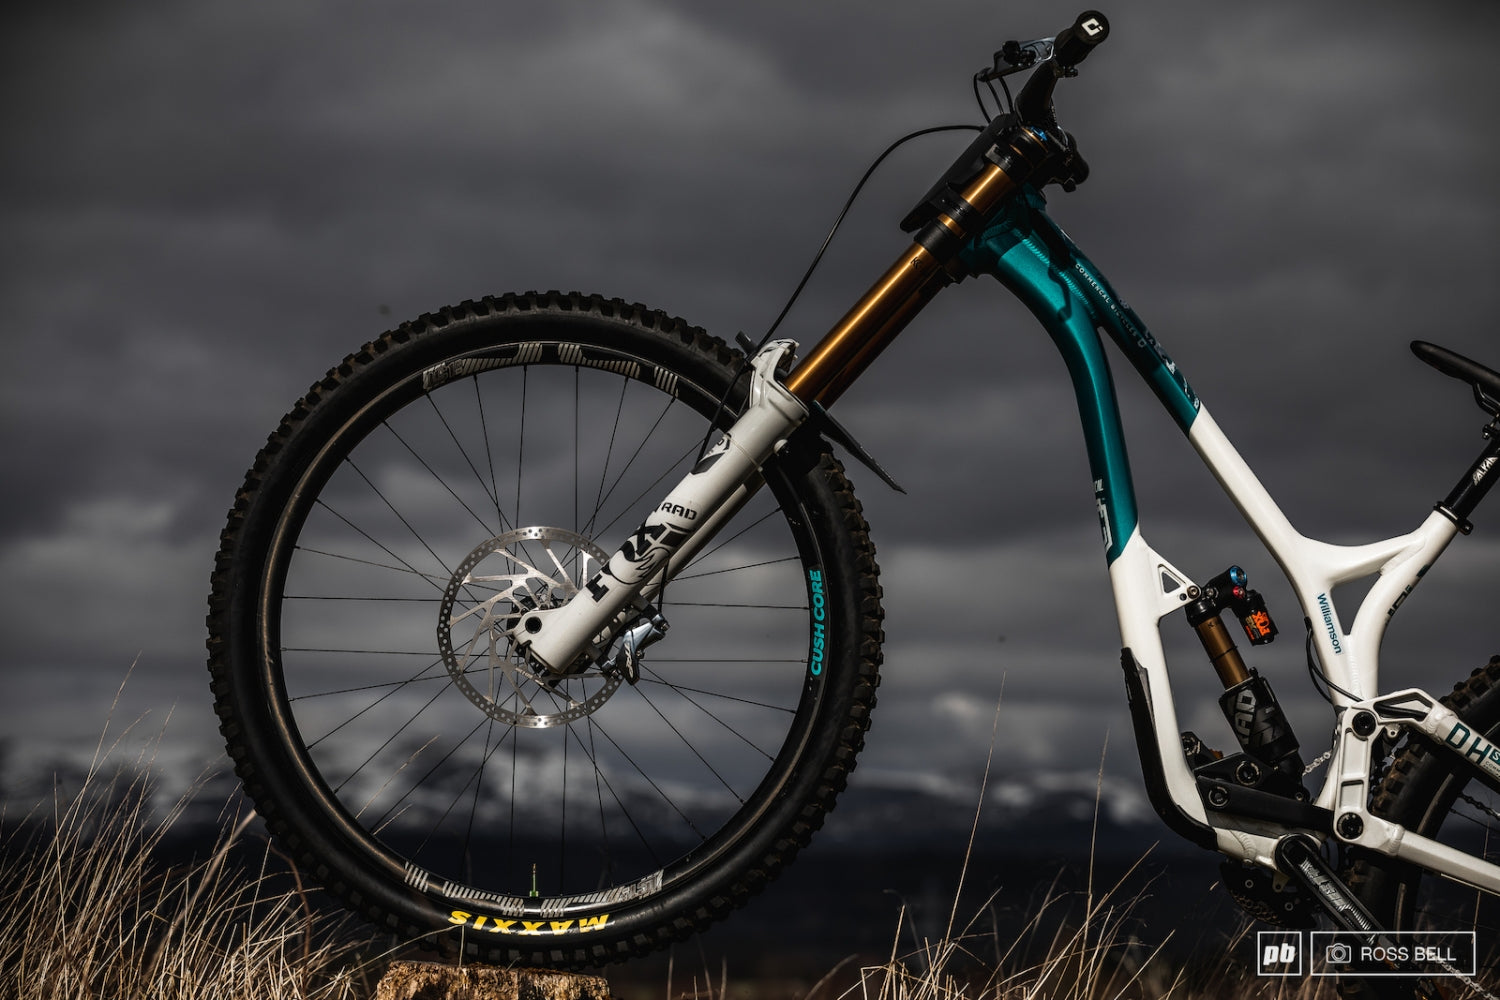 Ross Bell, PinkBike journalist, caught up with him to shoot his new SUPREME DH 29